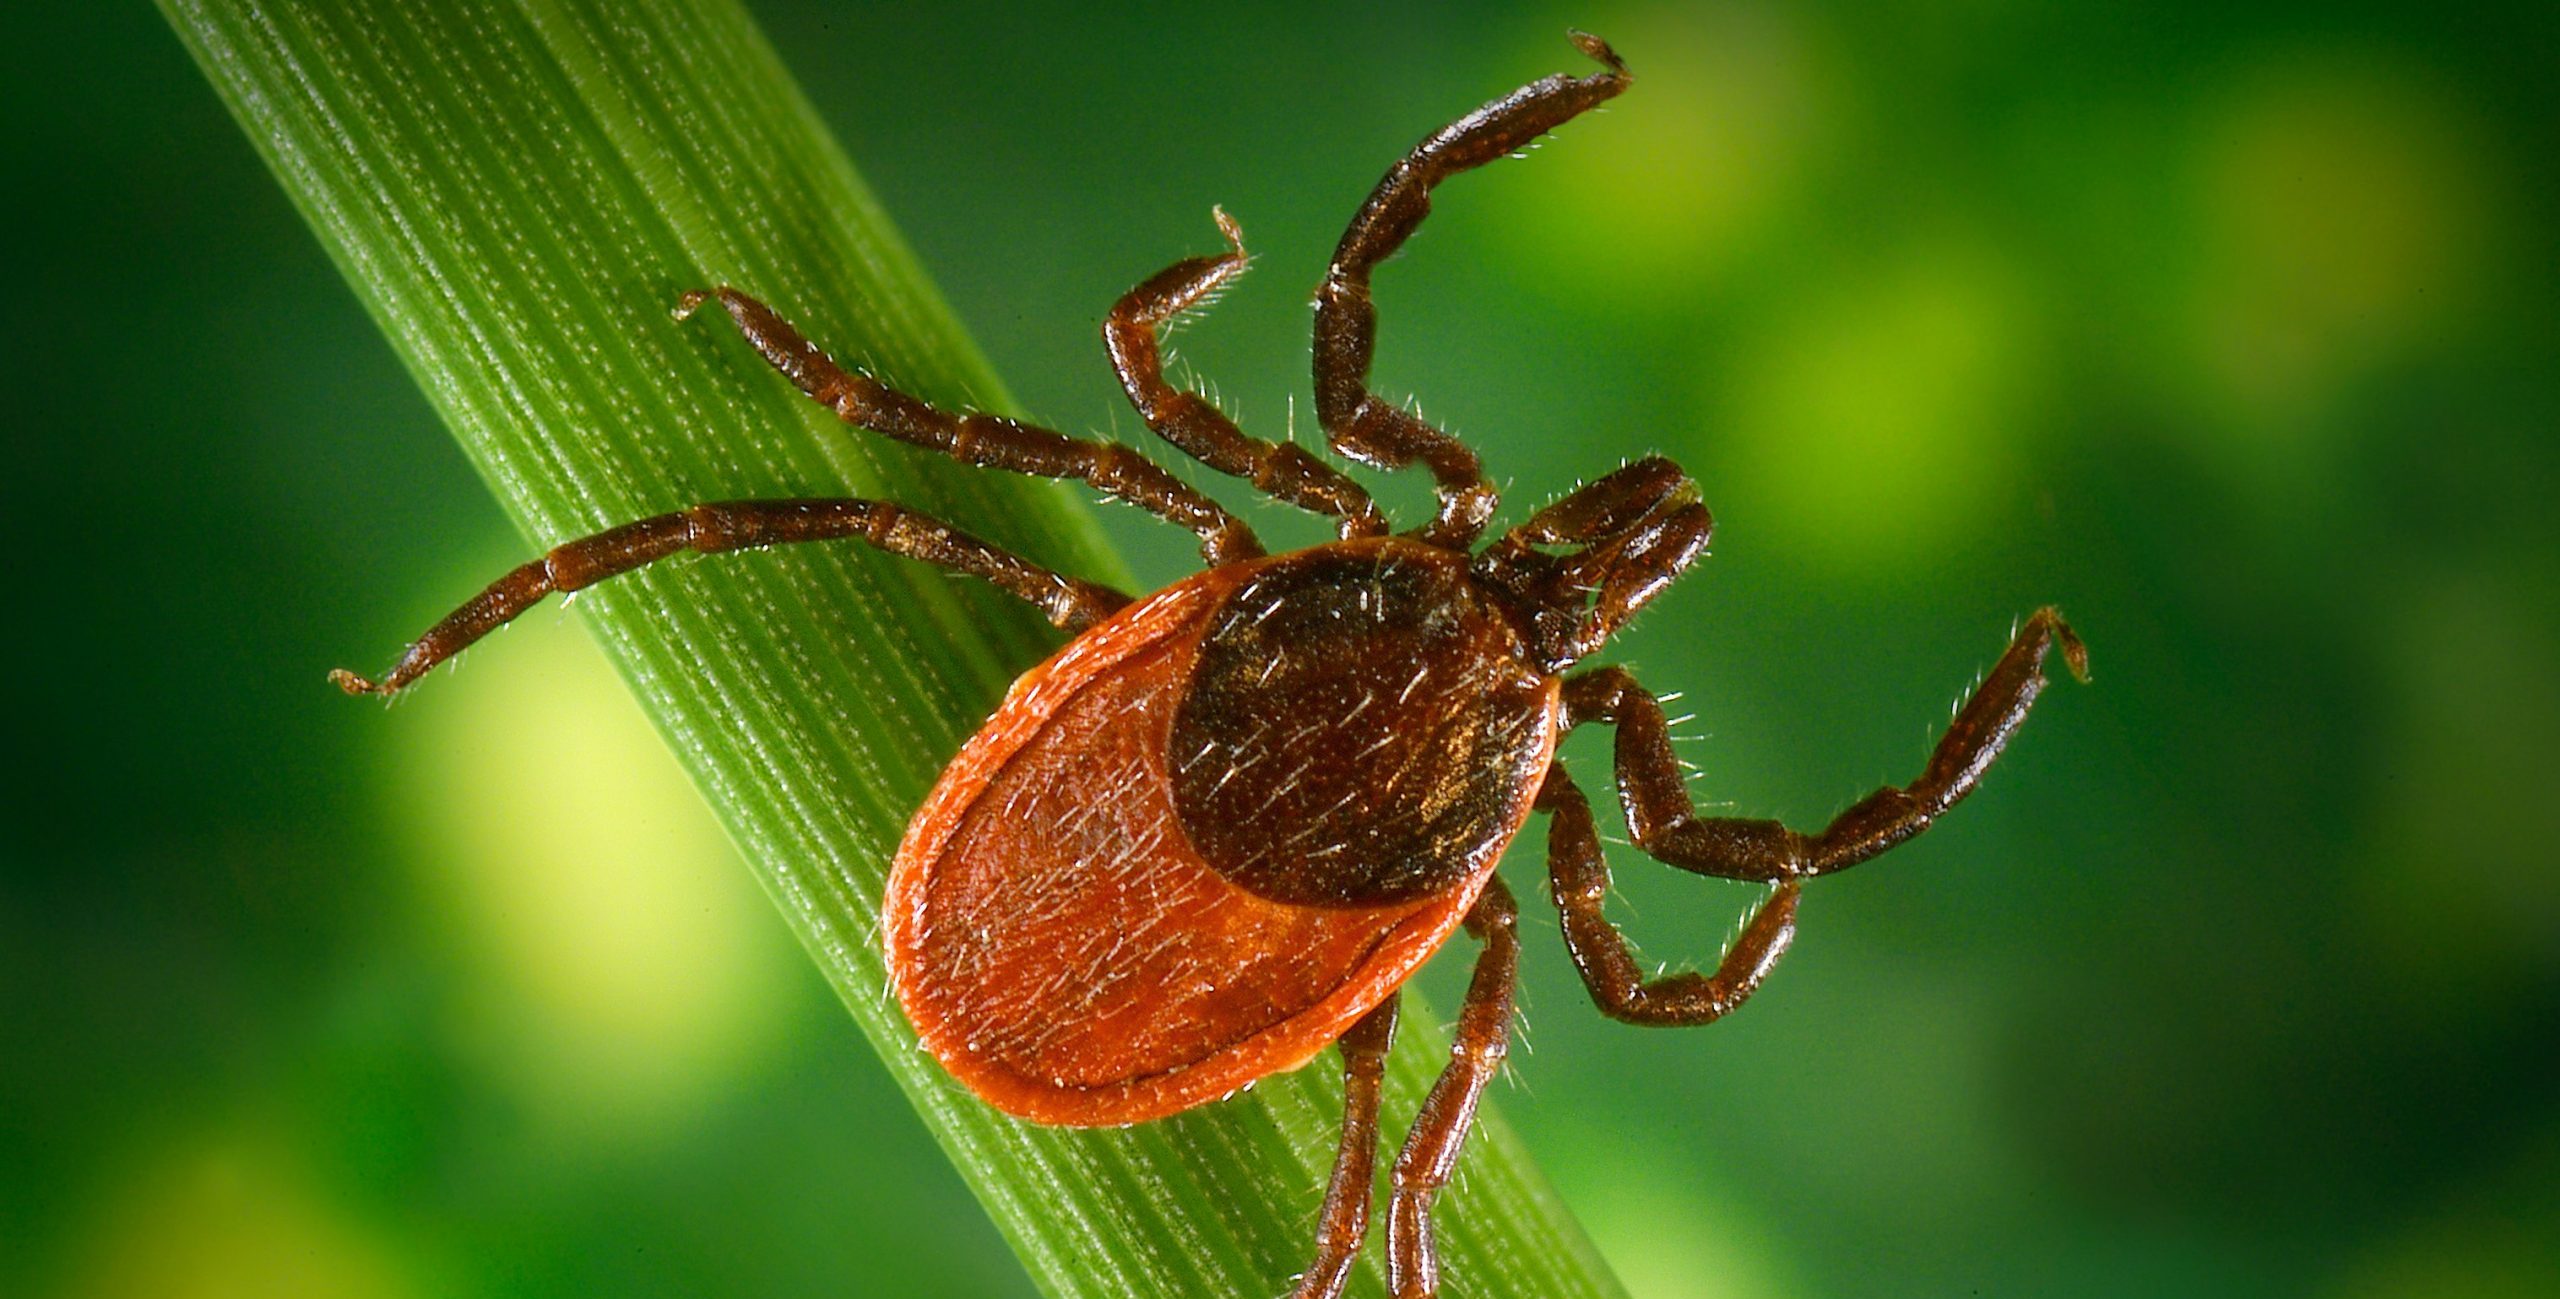 Read more about the article Assessing Durability and Safety of Permethrin Impregnated Uniforms Used by Outdoor Workers to Prevent Tick Bites after One Year of Use